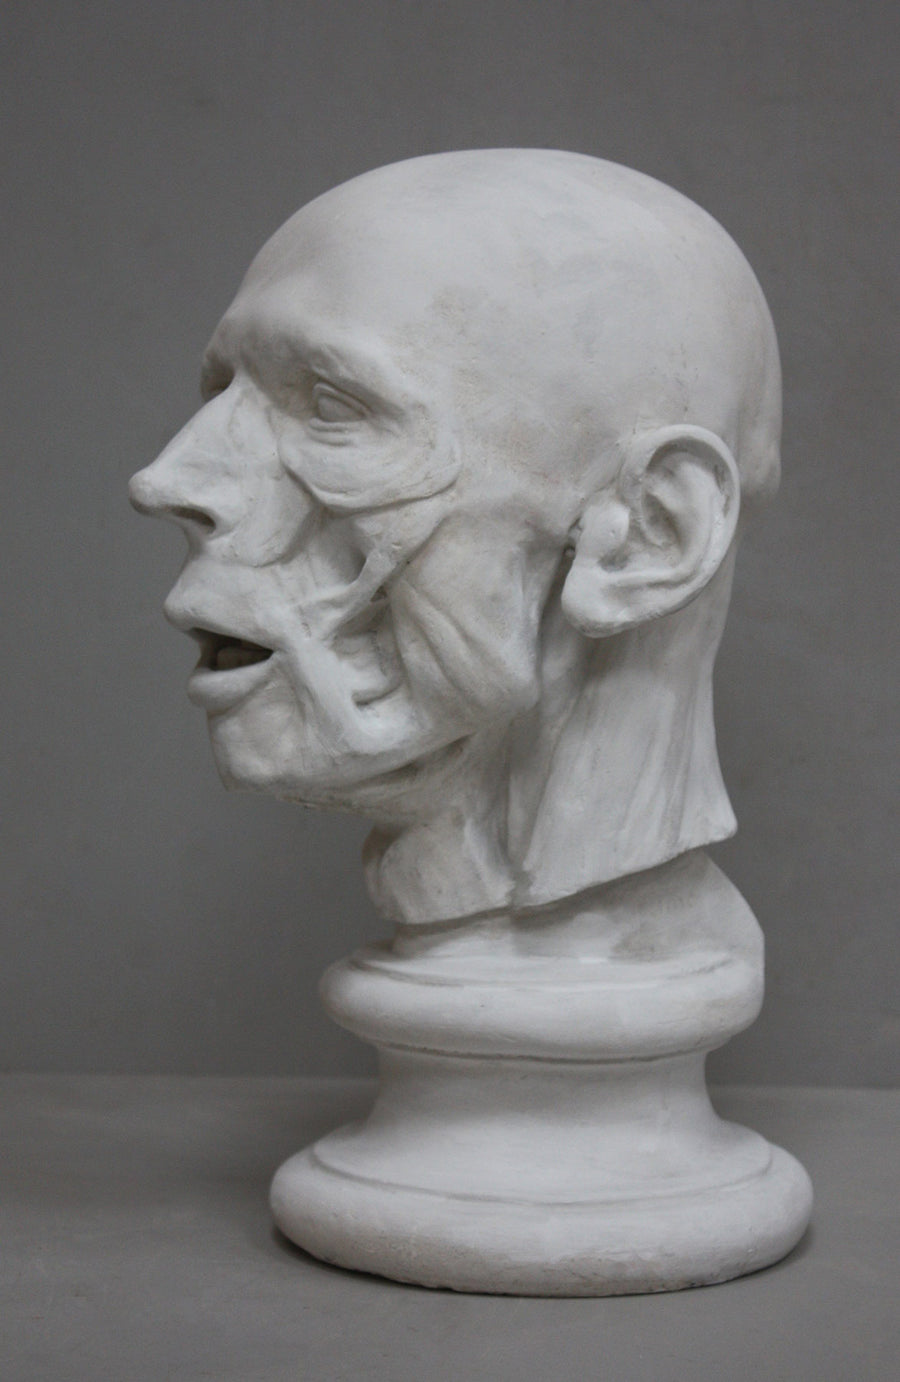 photo of plaster cast anatomical sculpture of man's head on socle base with a gray background